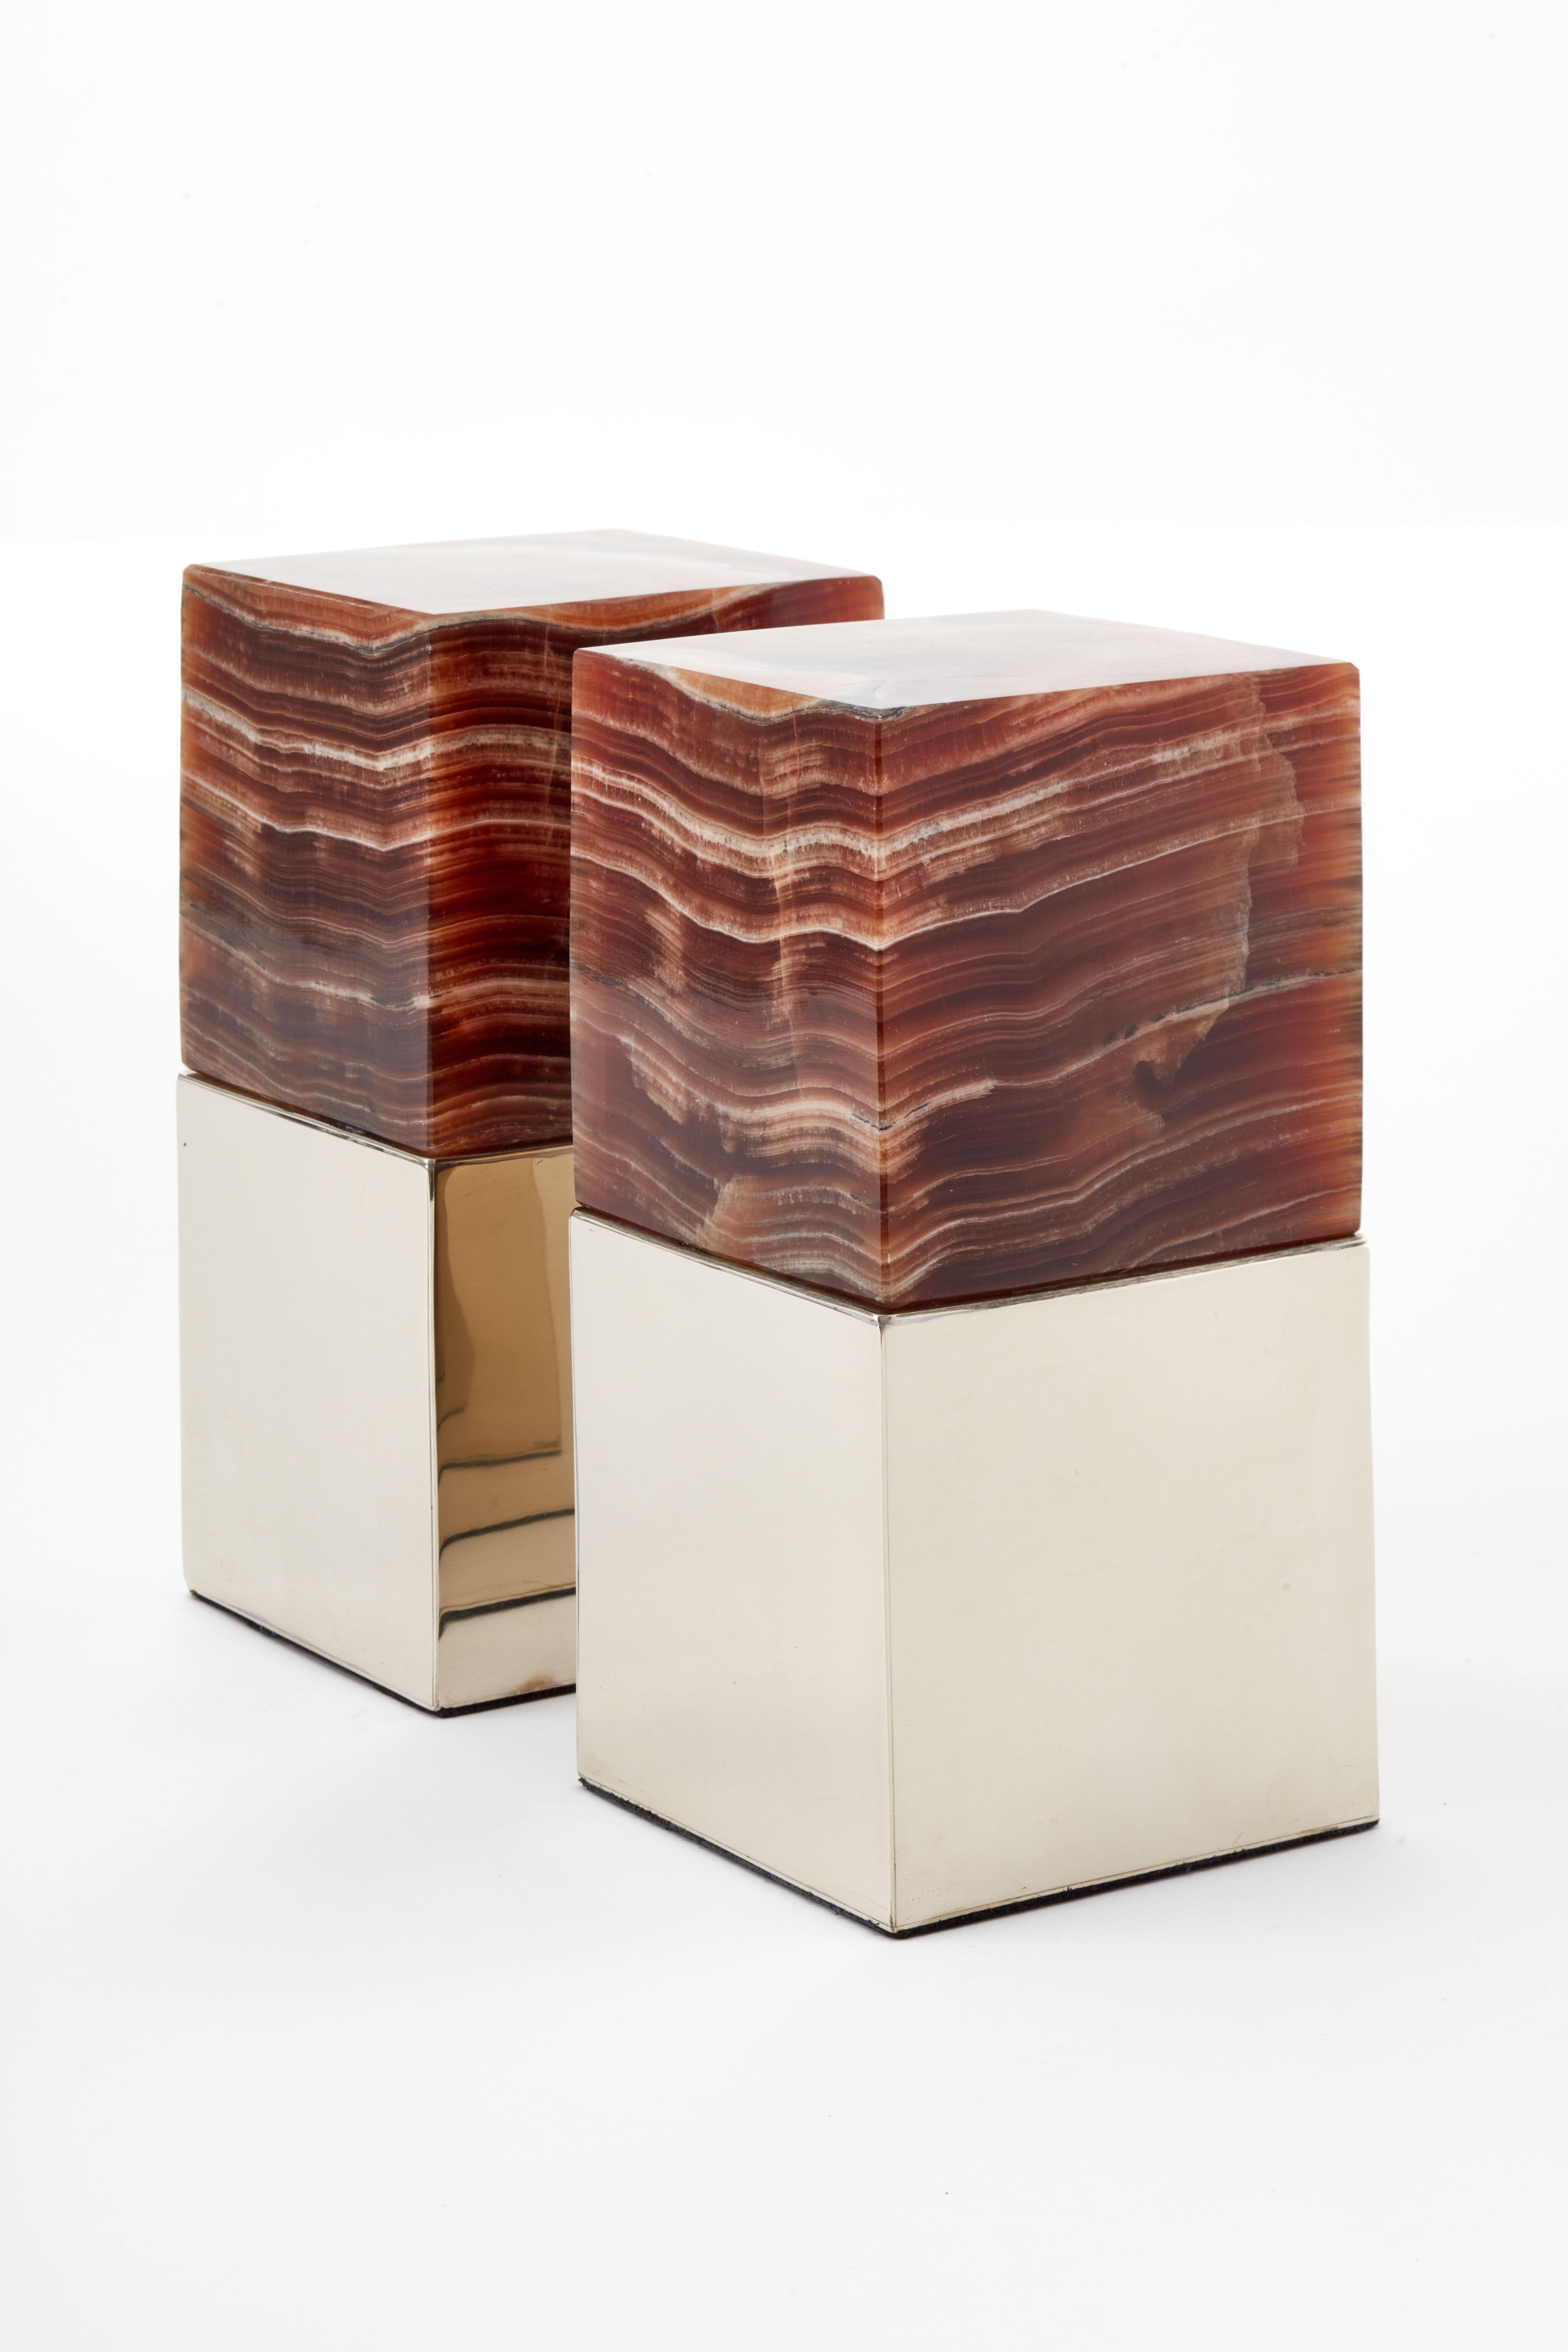 Argentine Salta Large Square Bordeaux  Onyx Stone Pair of Bookends For Sale